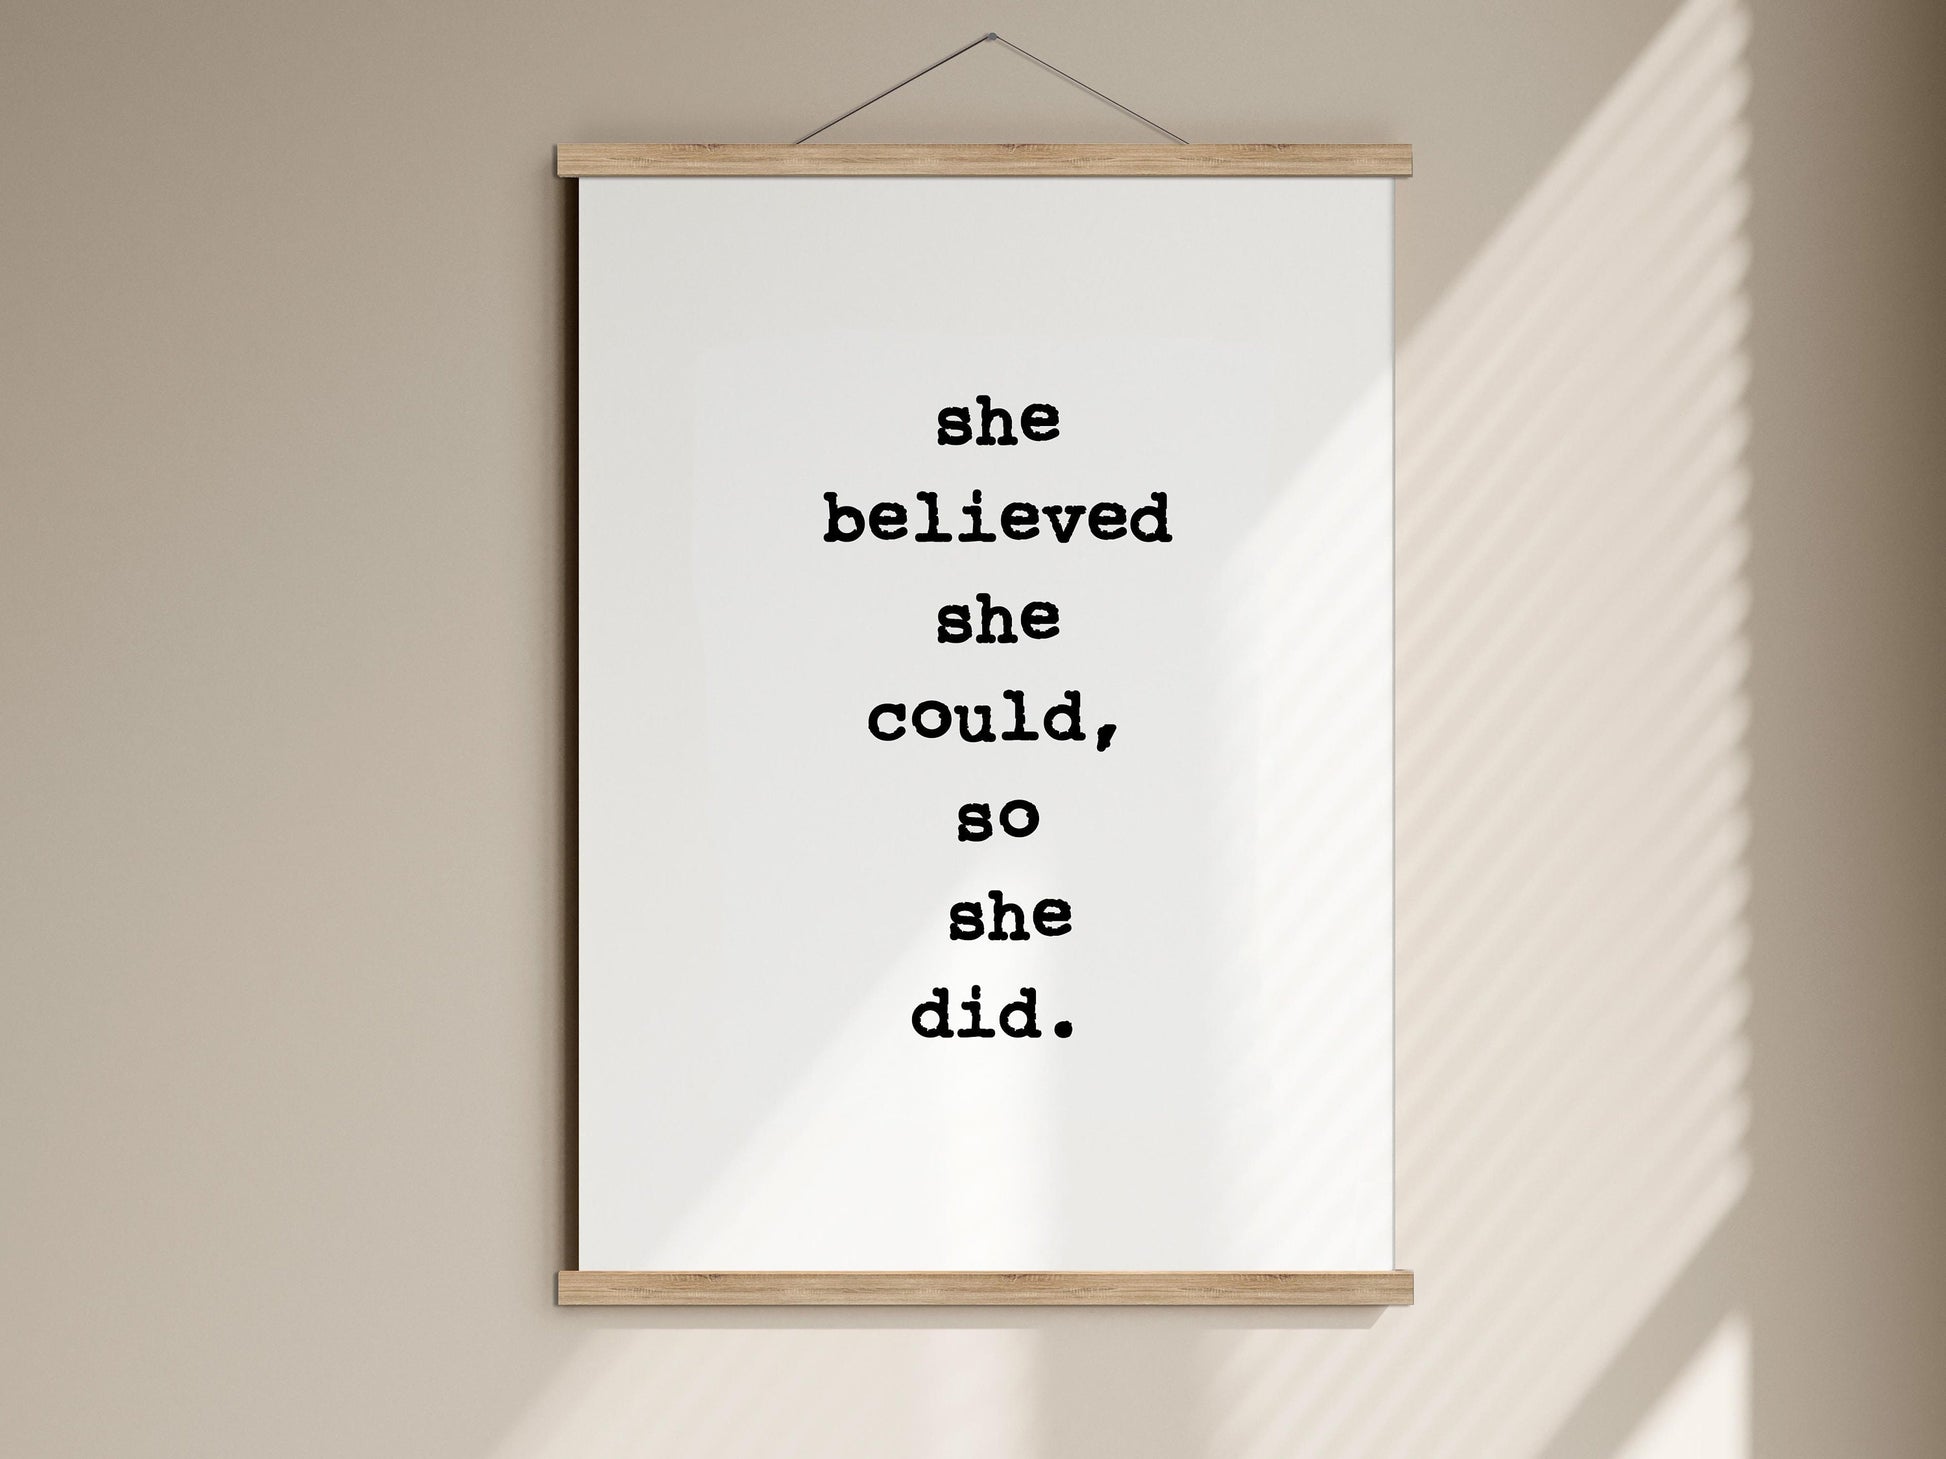 She believed she could so she did affirmation for daughter gift for daughter, girlfriend gift, feminist R S Grey framed print poster